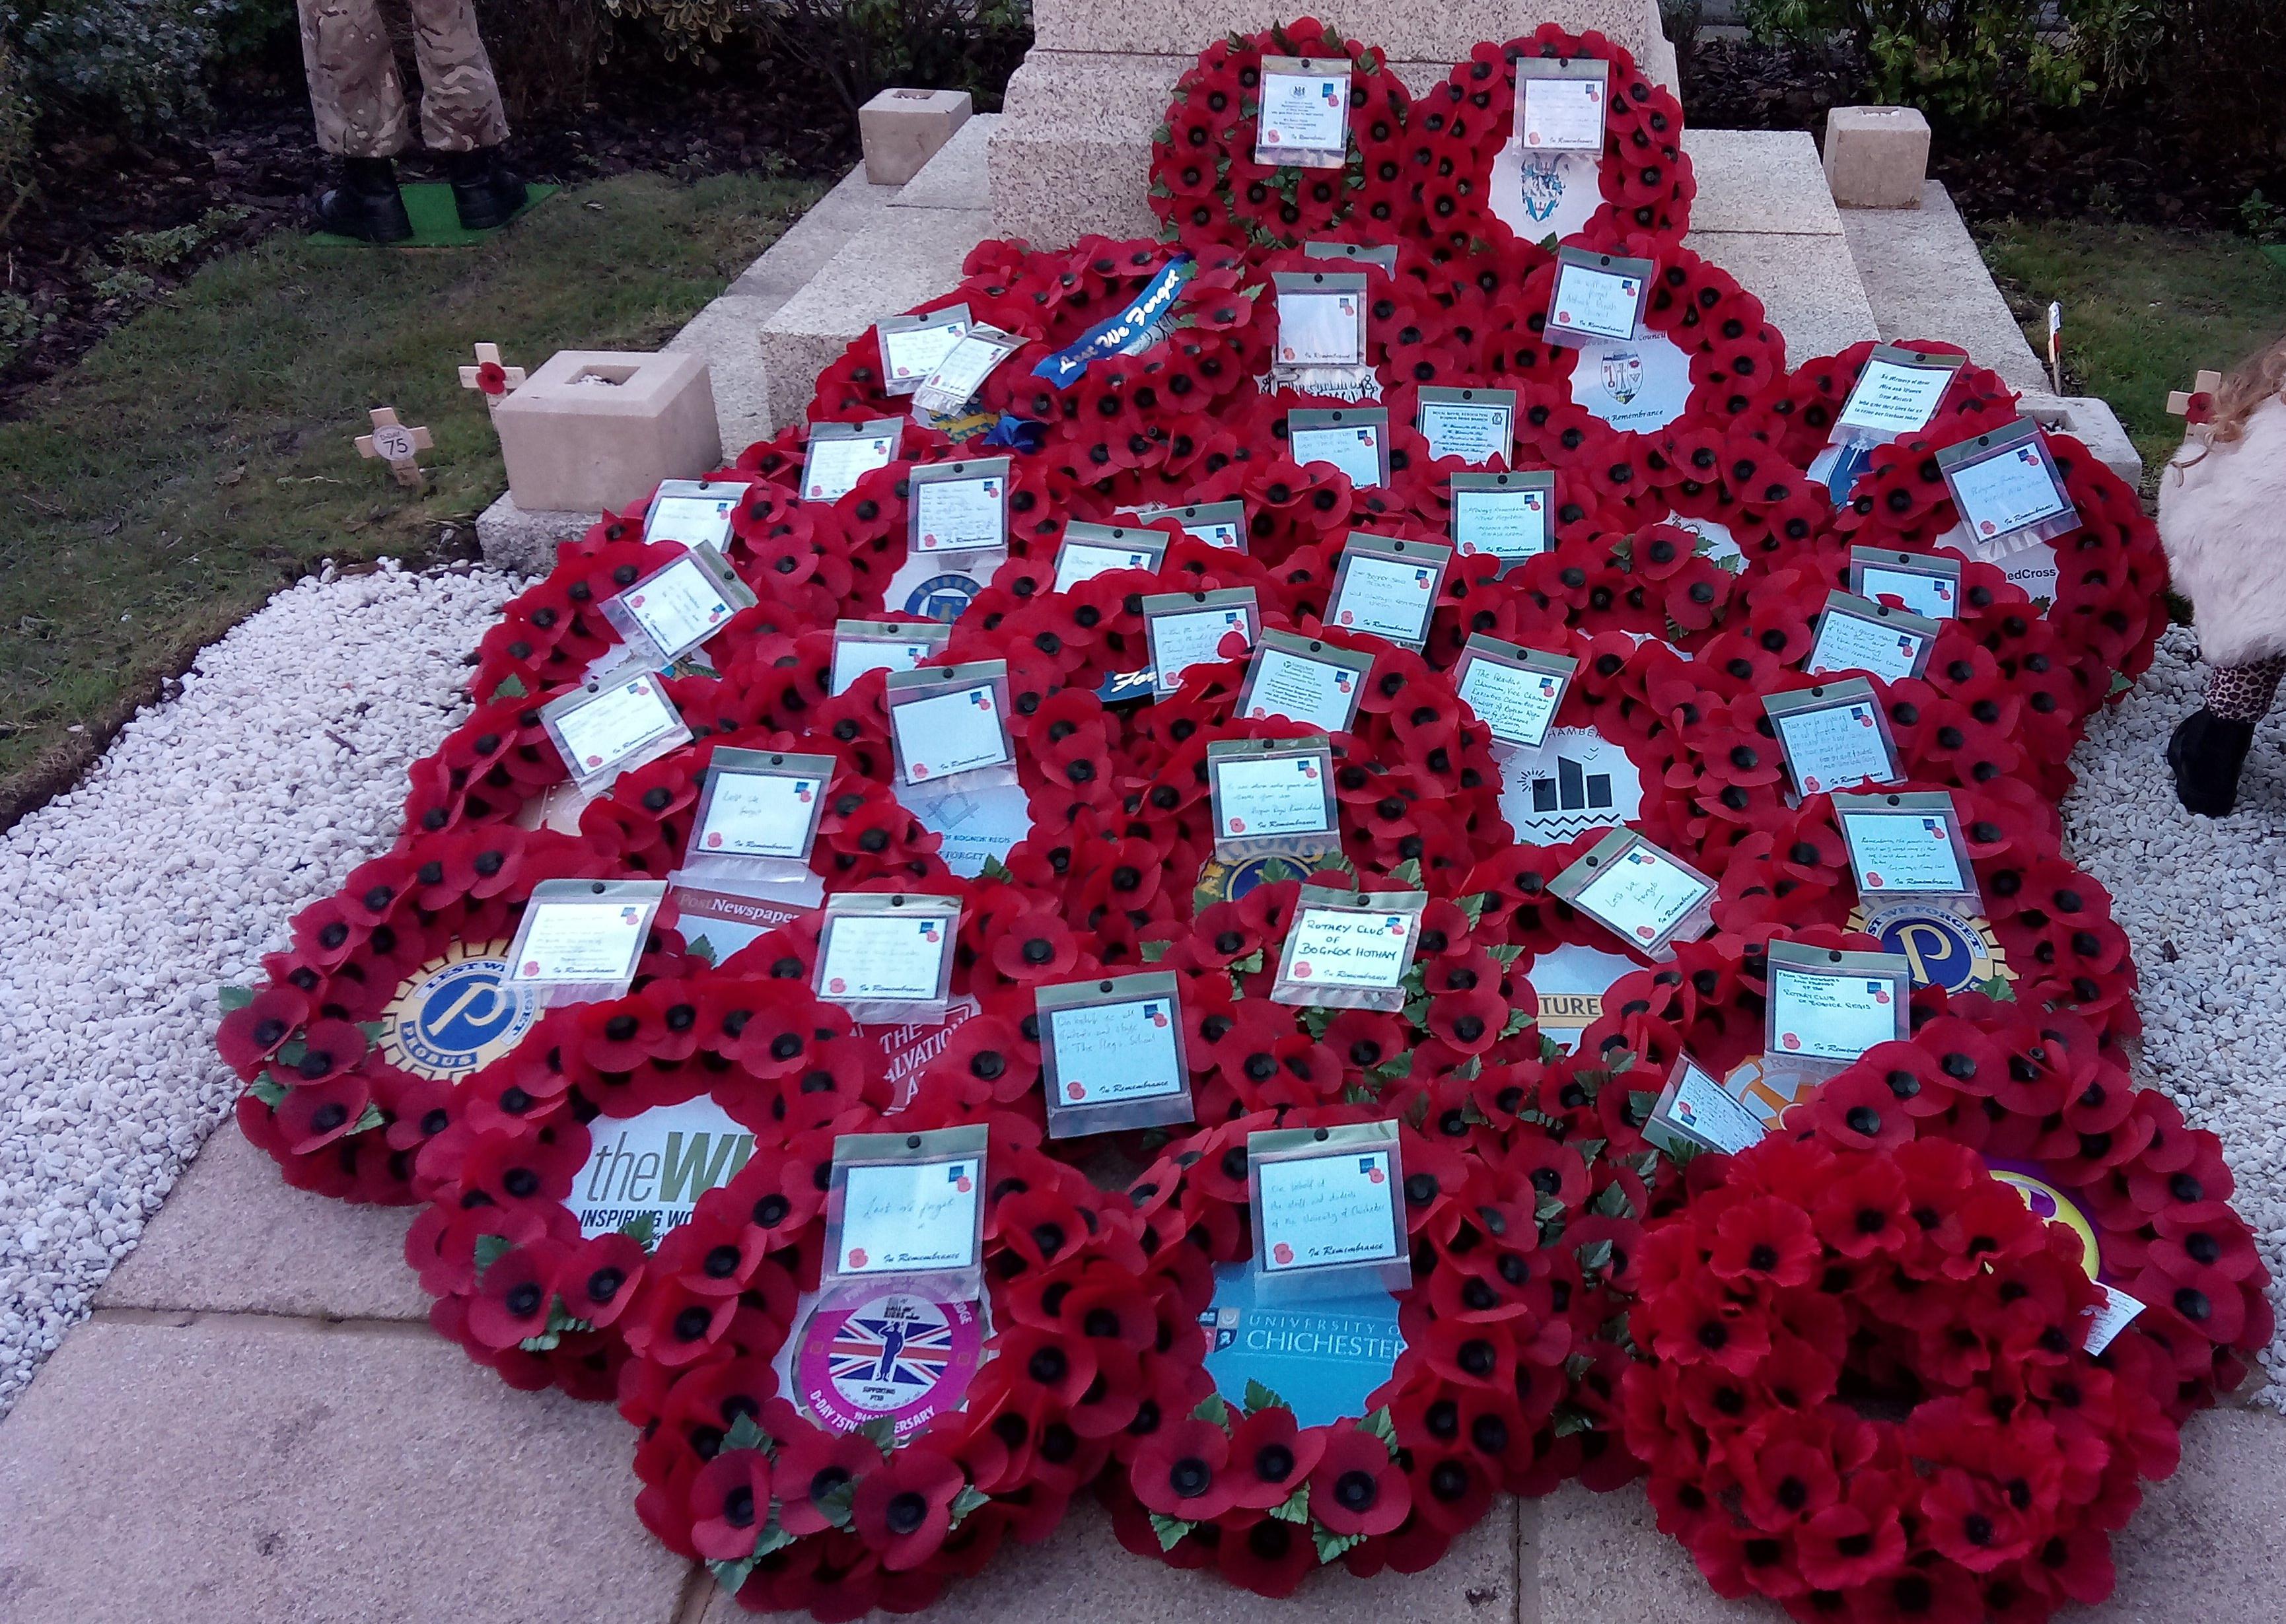 Wreaths laid in front of the memorial